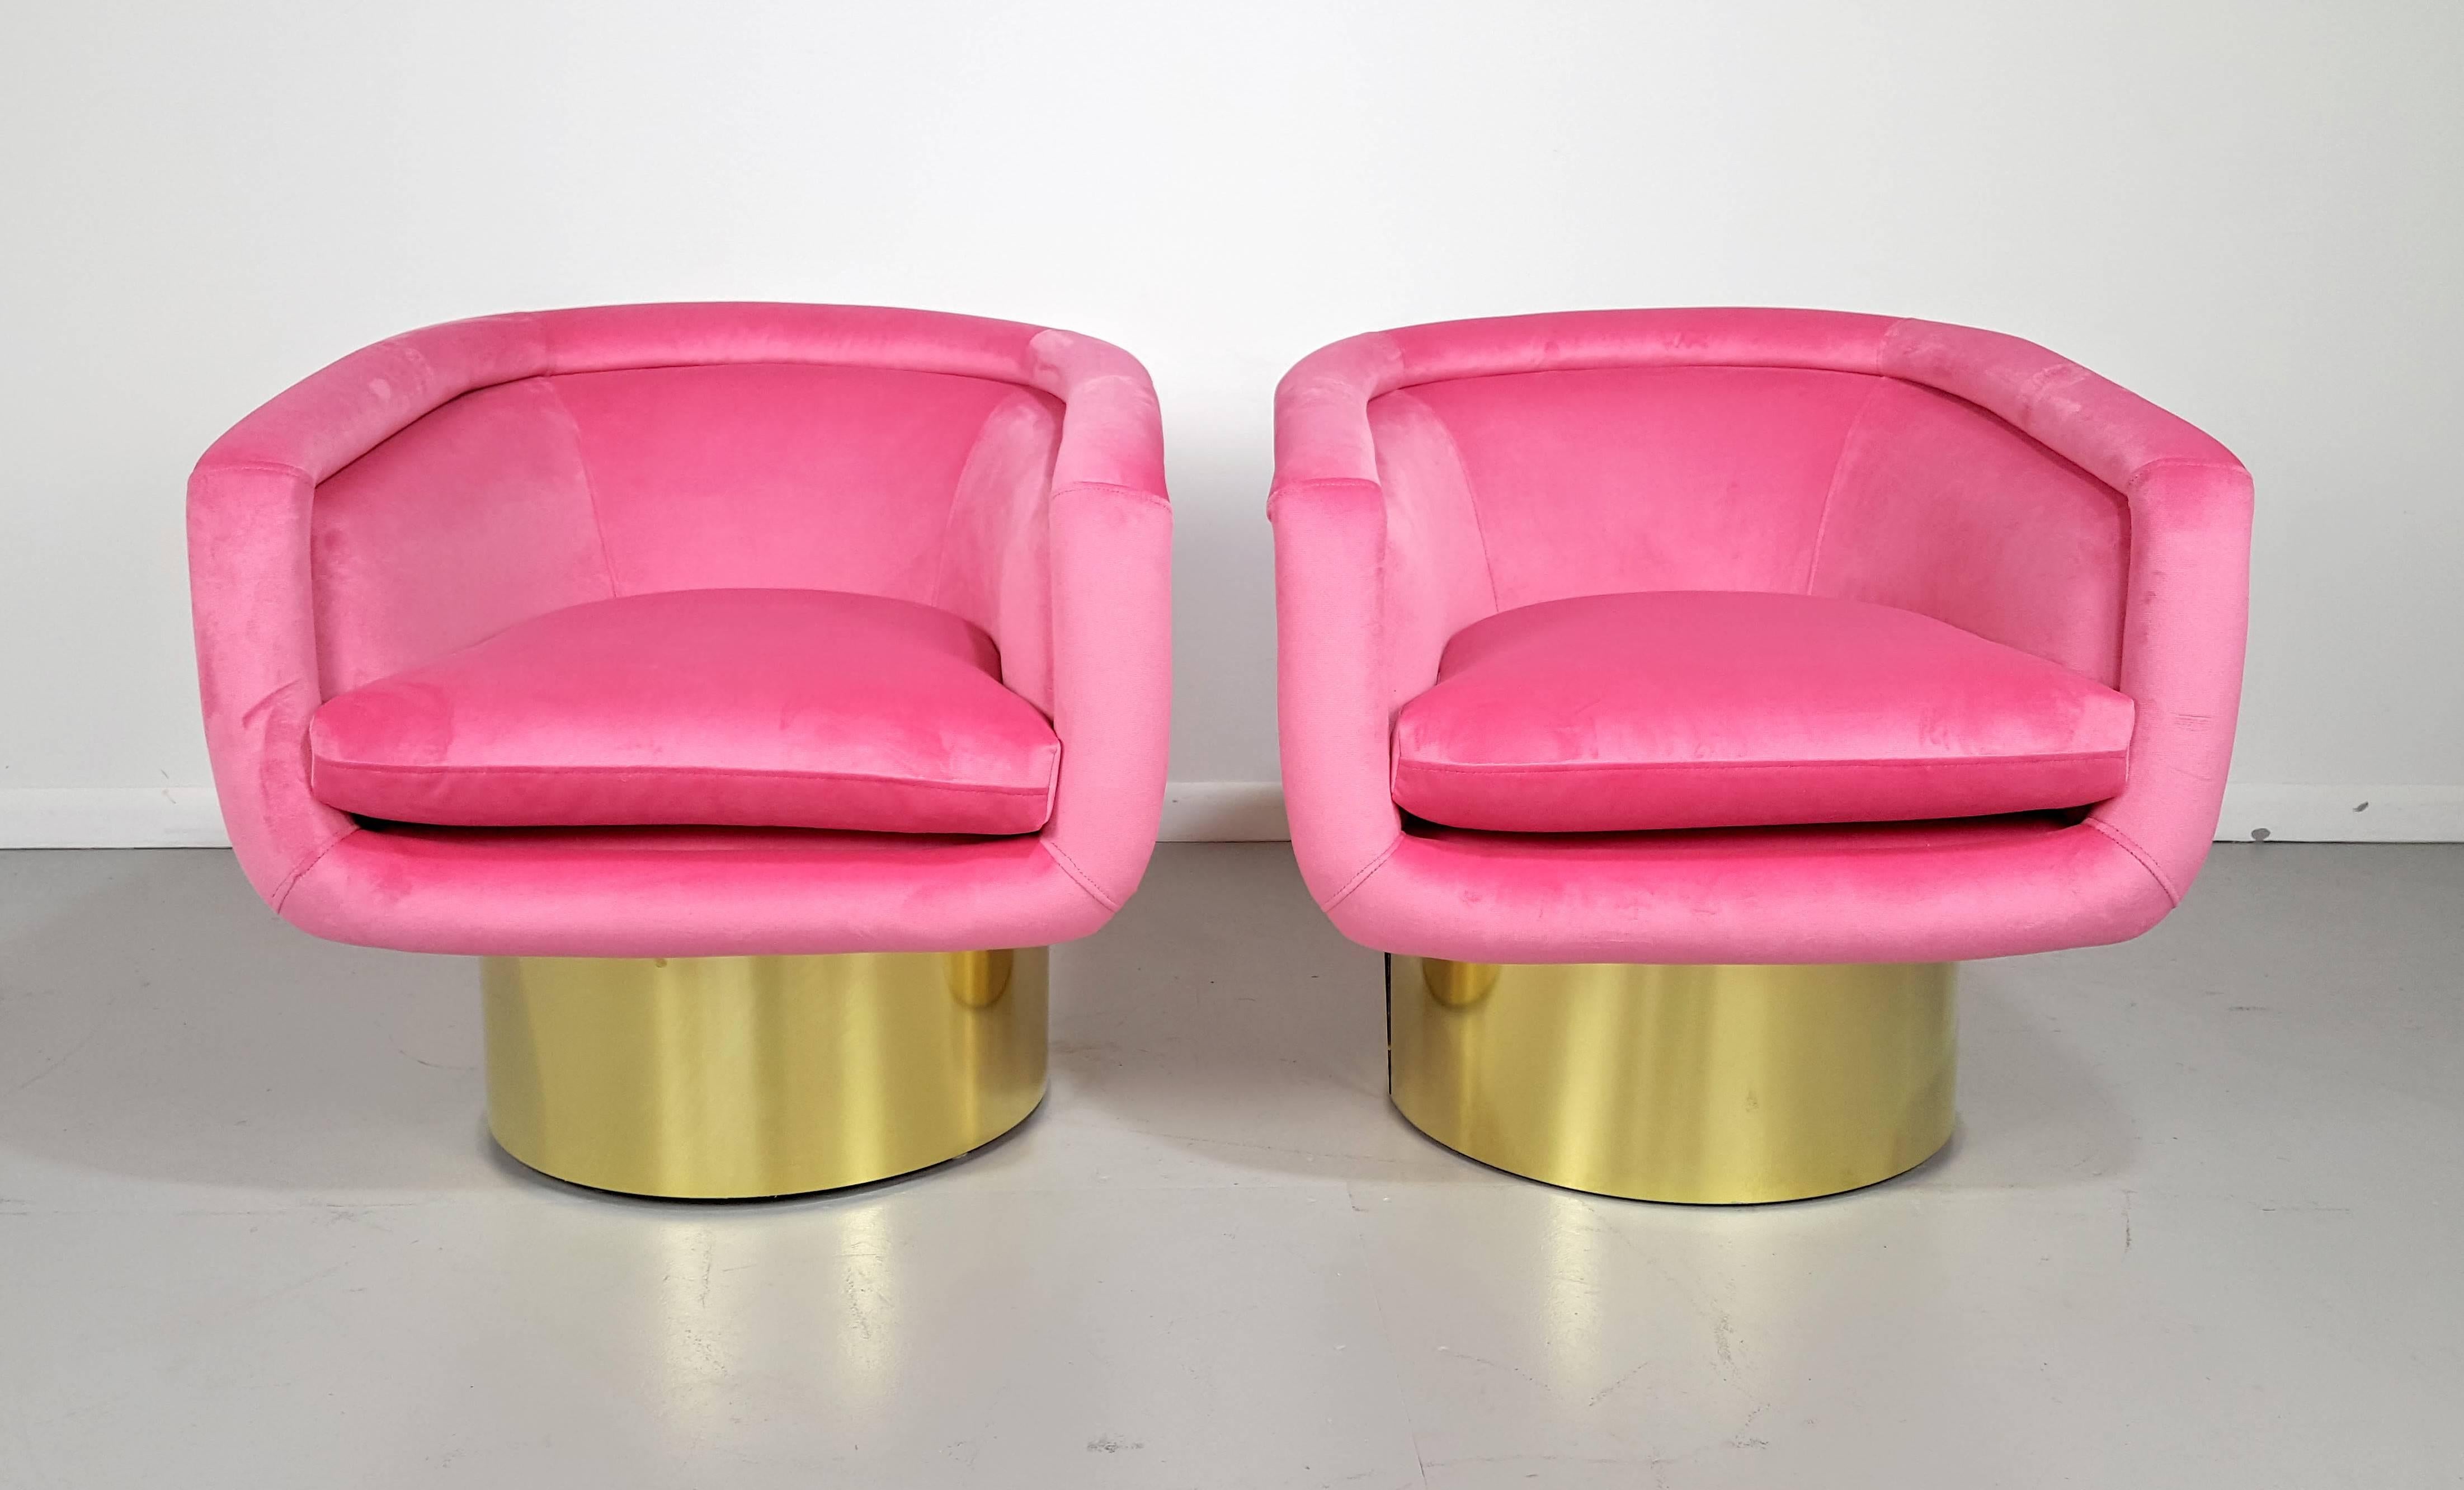 Luscious swivel lounge chairs in pink velvet with polished bronze bases. Designed by Leon Rosen for Pace Collection, 1970s. Fully restored. Very comfortable. Heavy and well-made. 

We offer free regular deliveries to NYC and Philadelphia area.